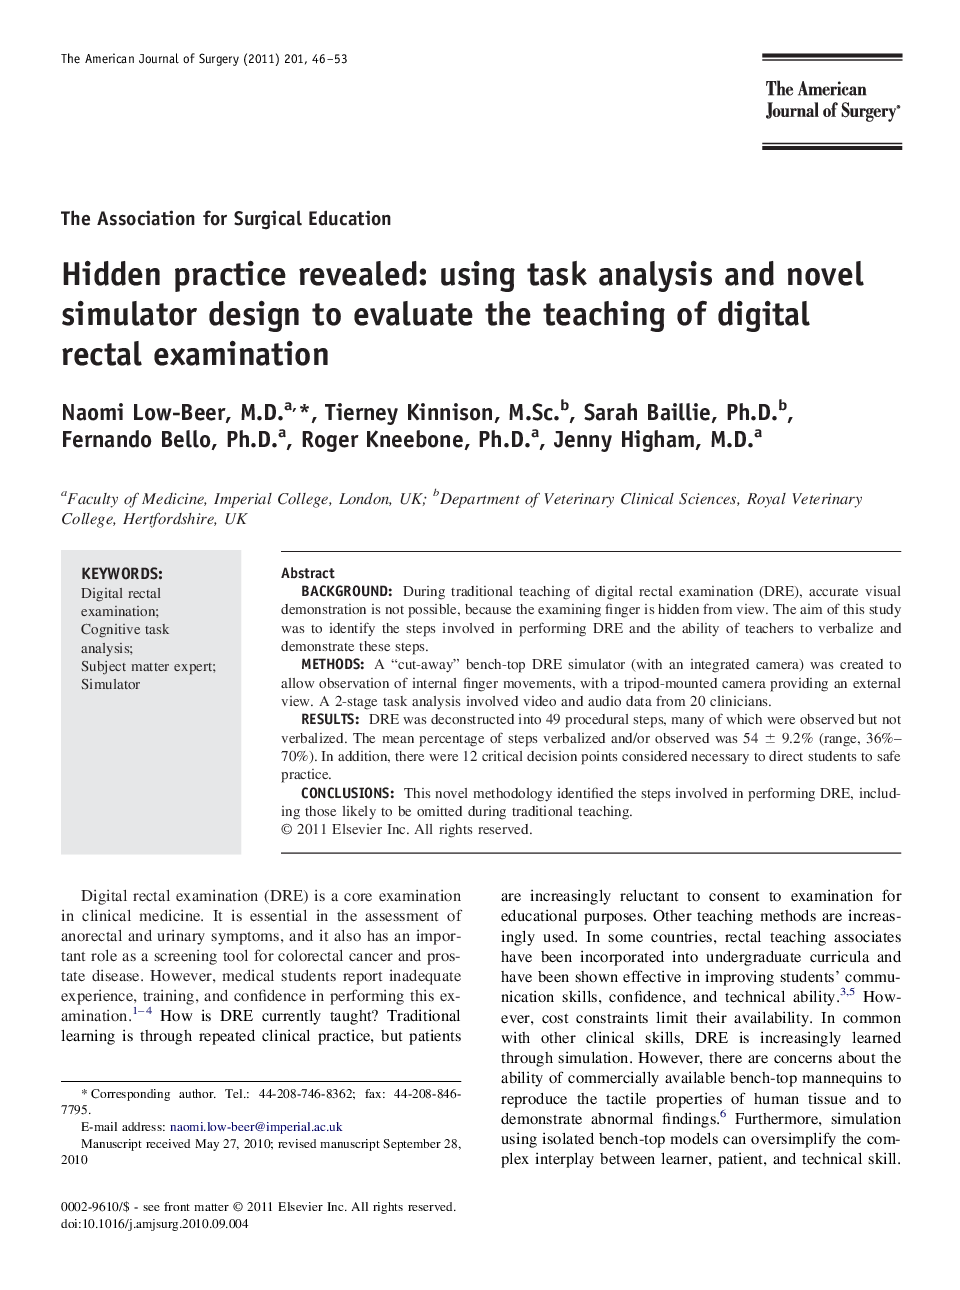 Hidden practice revealed: using task analysis and novel simulator design to evaluate the teaching of digital rectal examination